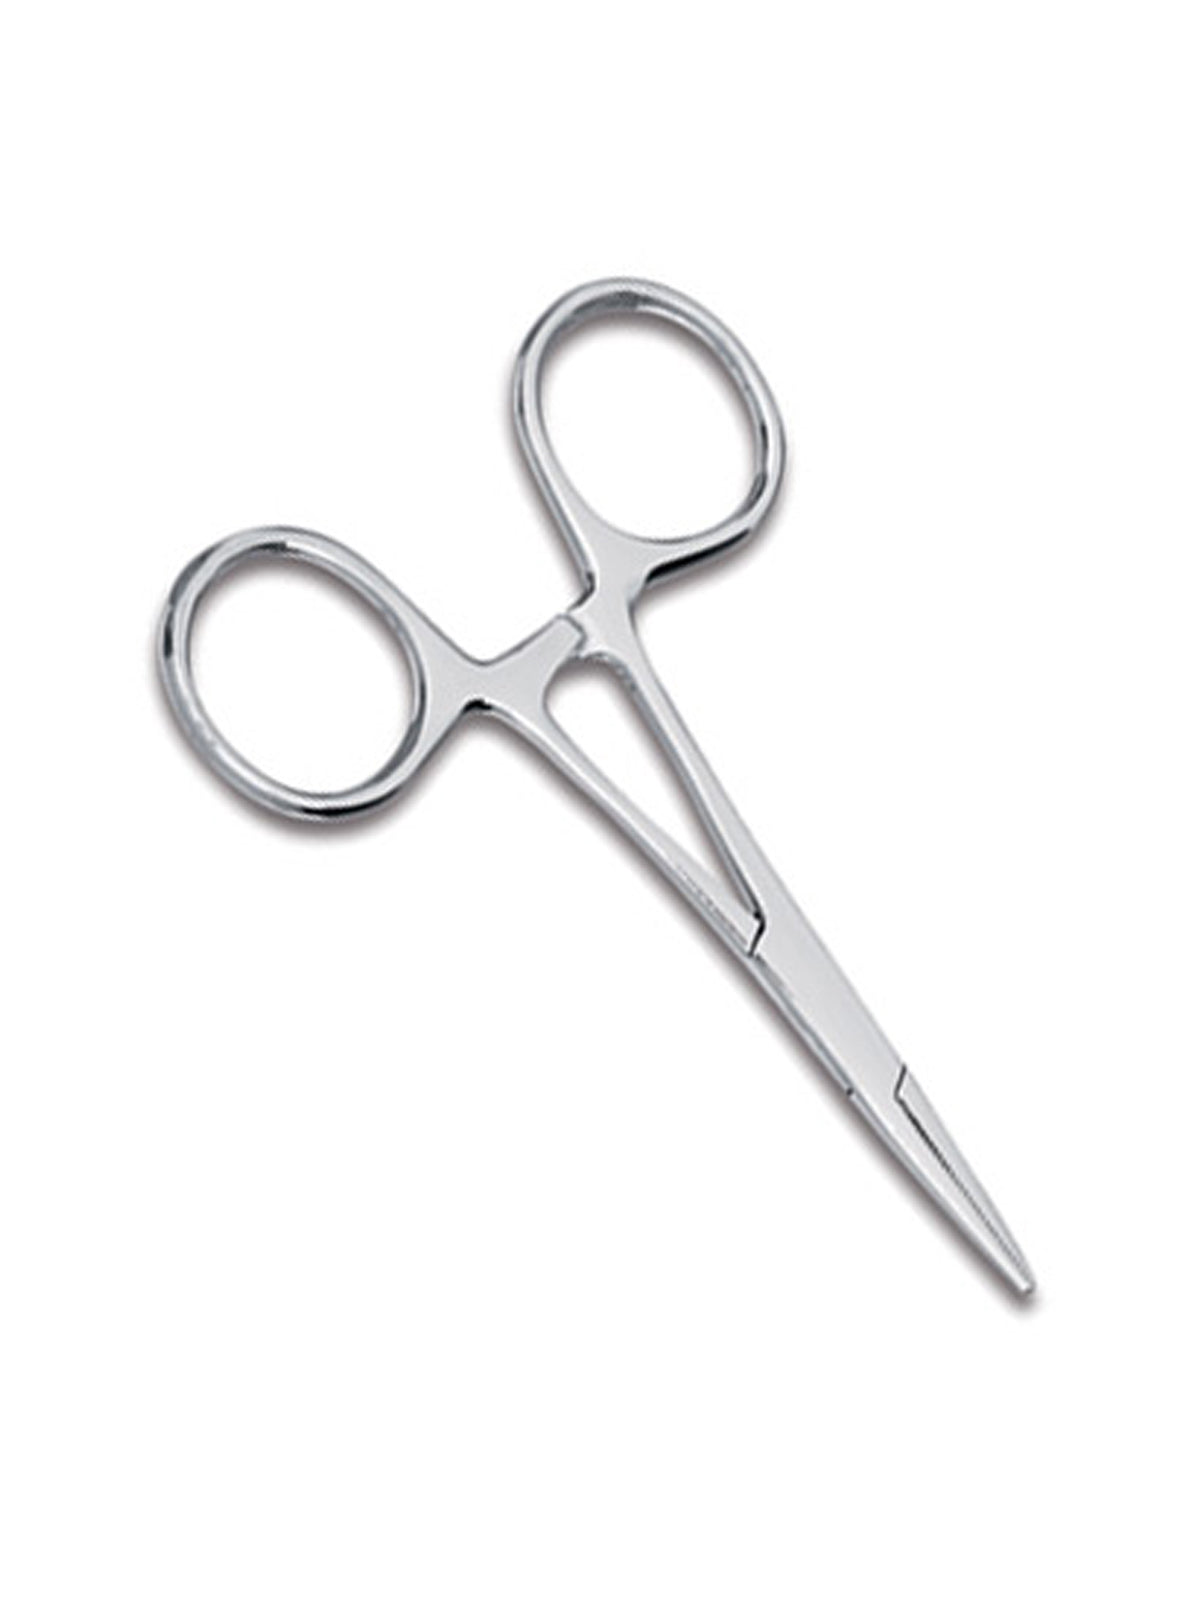 3.5" Mosquito Forceps - 1530 - Standard